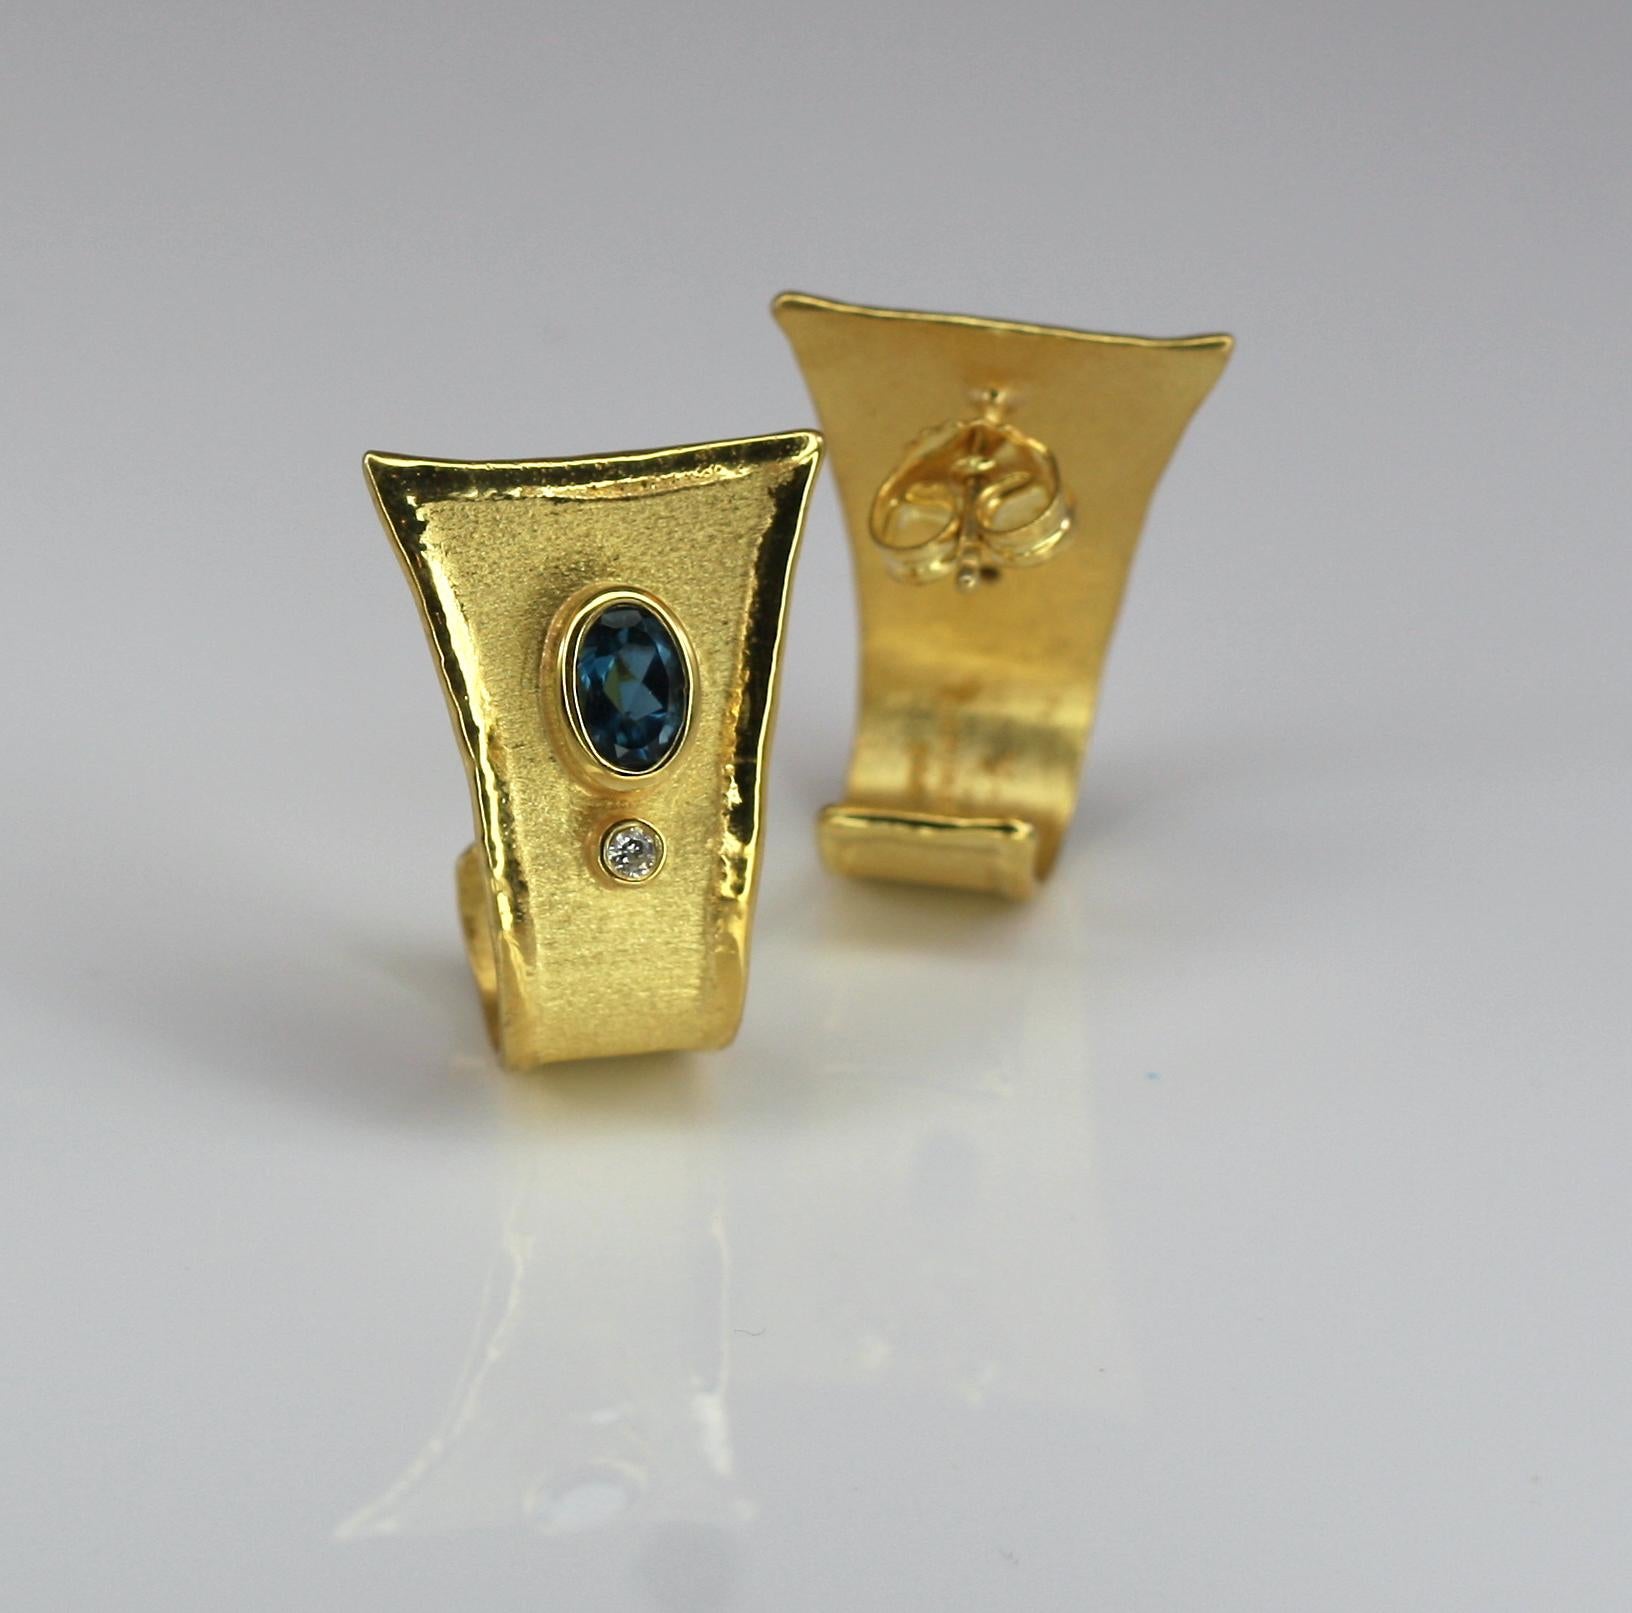 Yianni Creations 2.20 Carat Blue Topaz and Diamond Earrings in 18 Karat Gold For Sale 1